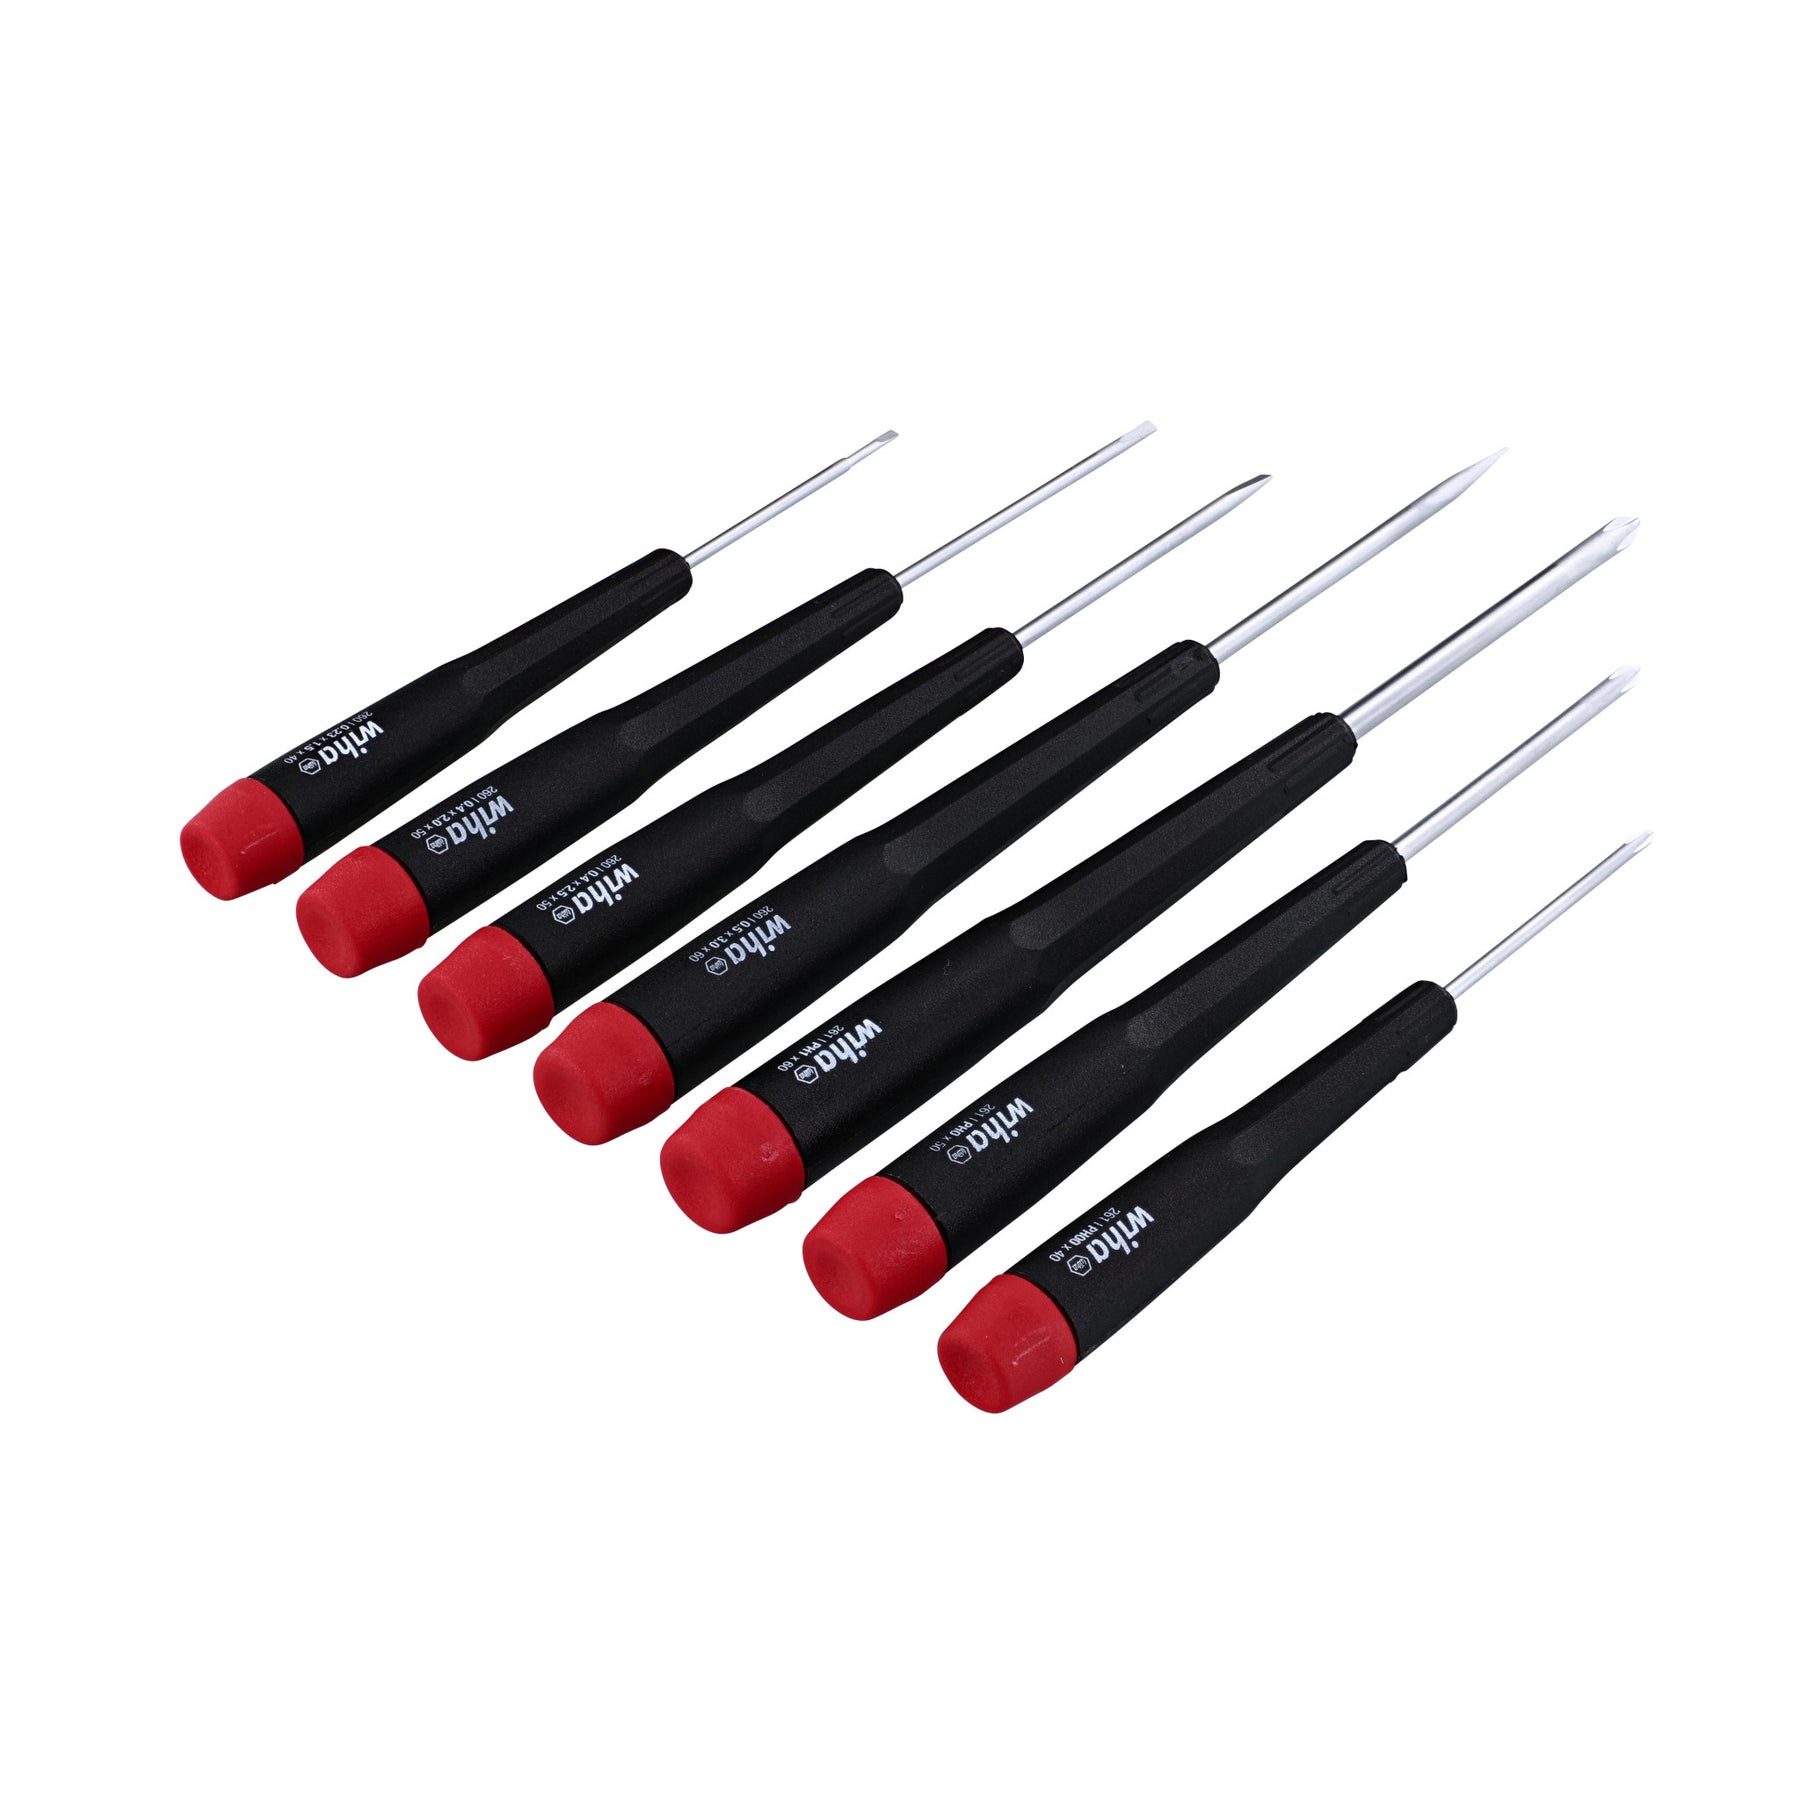 7 Piece Precision Slotted and Phillips Screwdriver Set